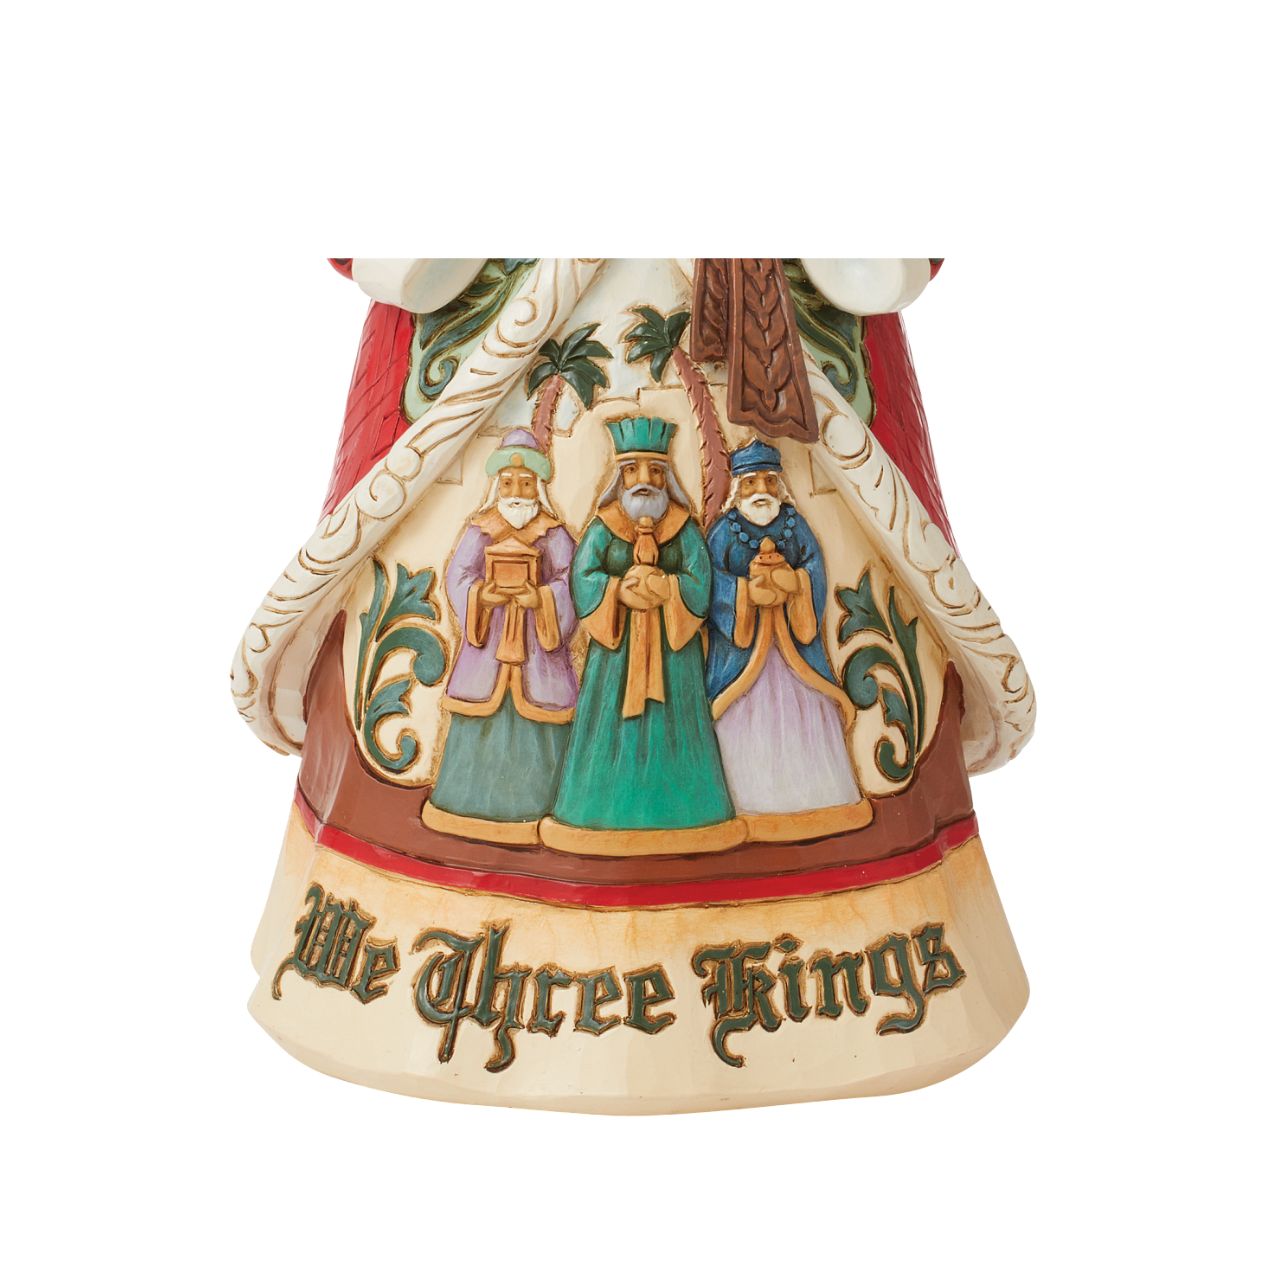 Heartwood Creek - We Three Kings 17th Annual Song Santa Figurine  Designed by award winning artist Jim Shore as part of the Heartwood Creek Christmas Collection, hand crafted using high quality cast stone and hand painted, this Santa - We Three Kings figurine is perfect for the Christmas season.